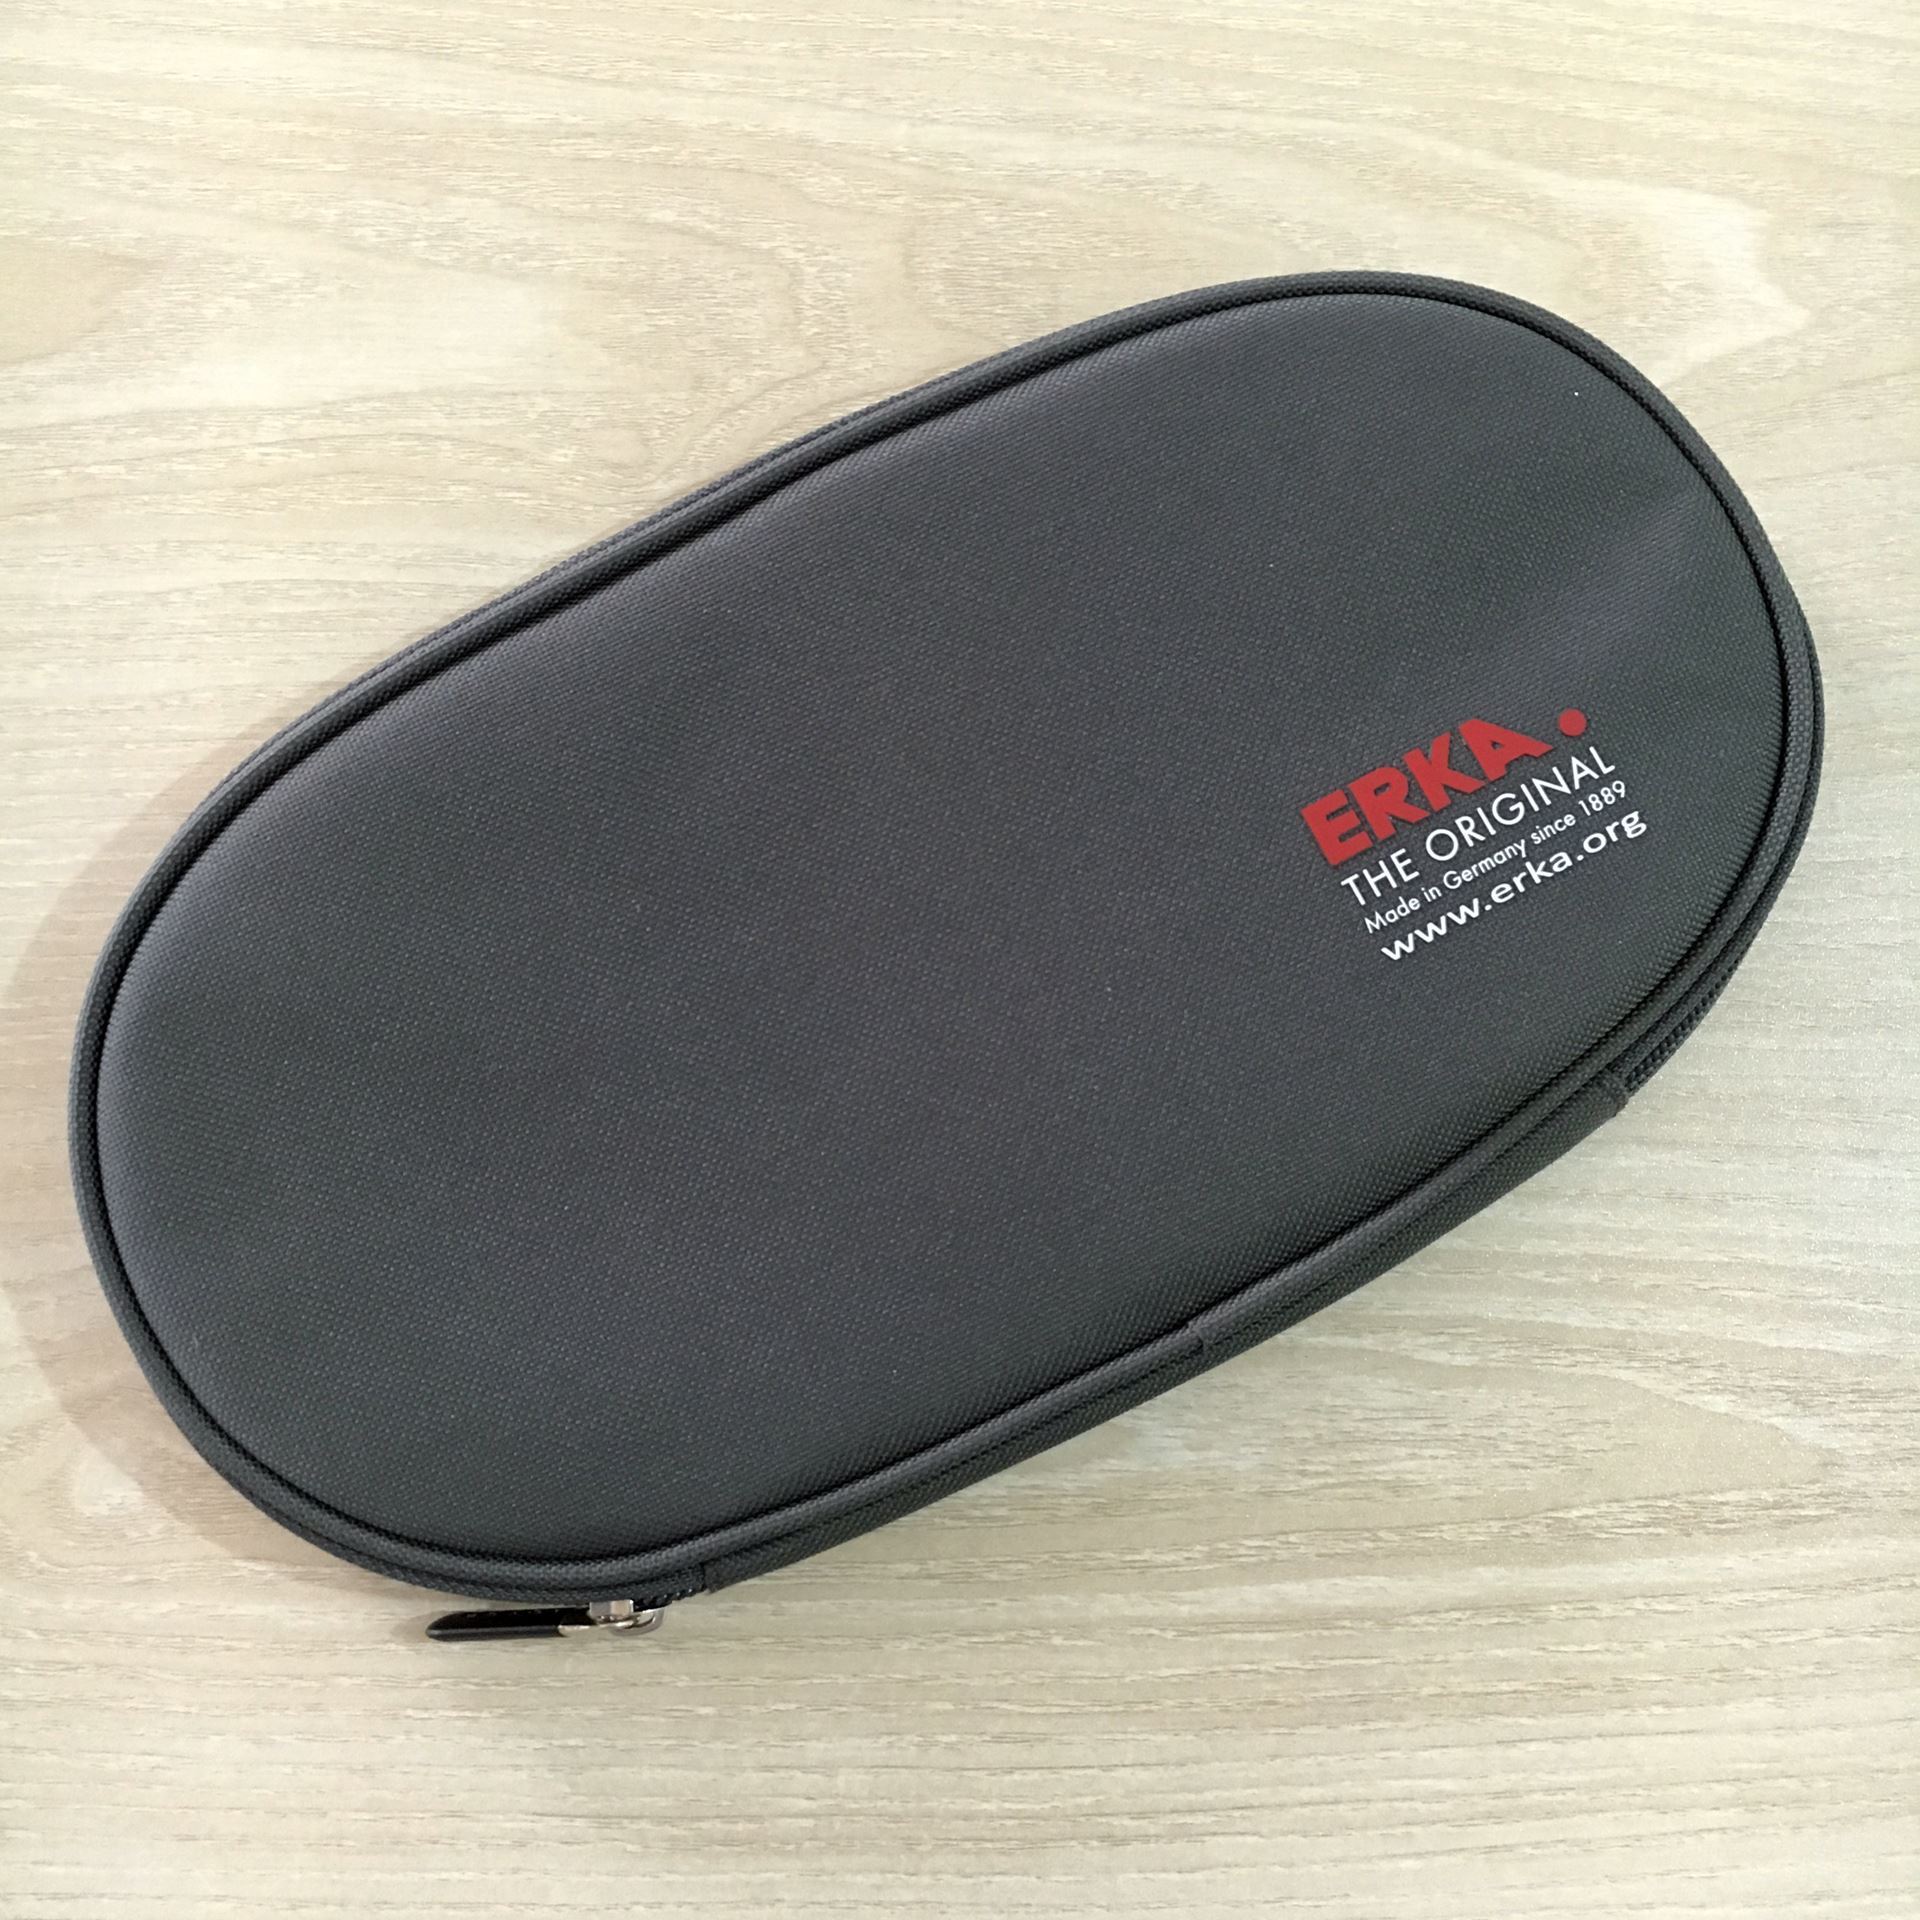 carrying case for stethoscopes